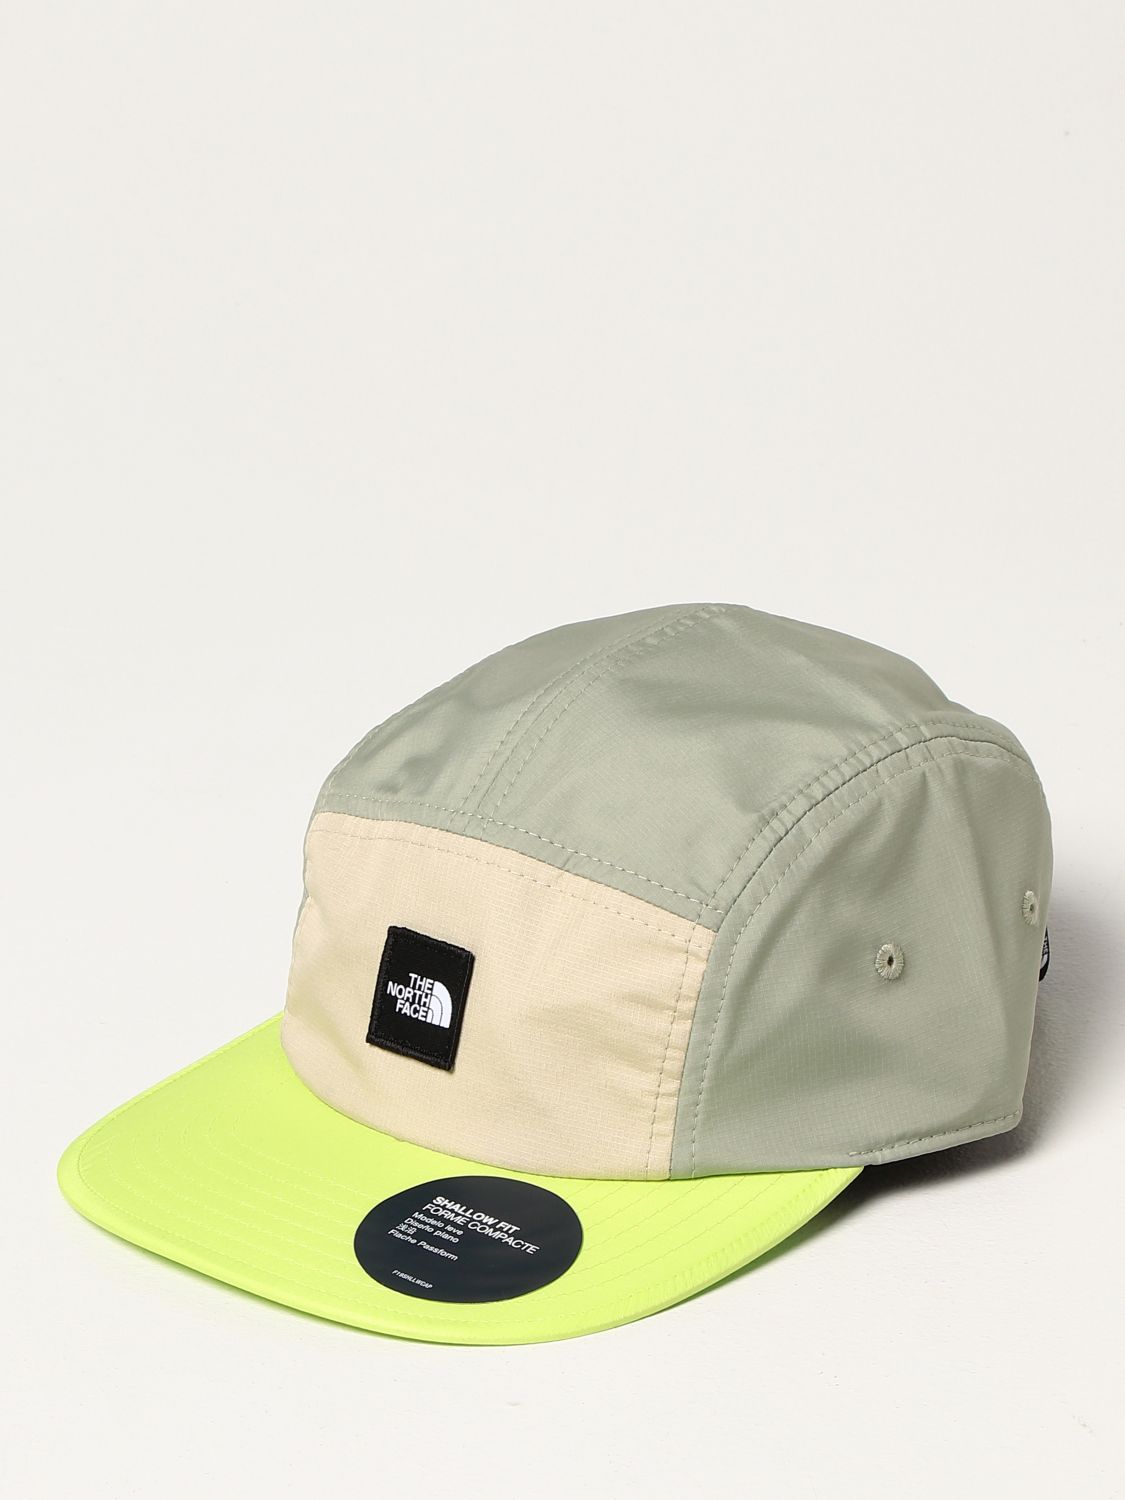 Hat The North Face: The North Face baseball cap green 1